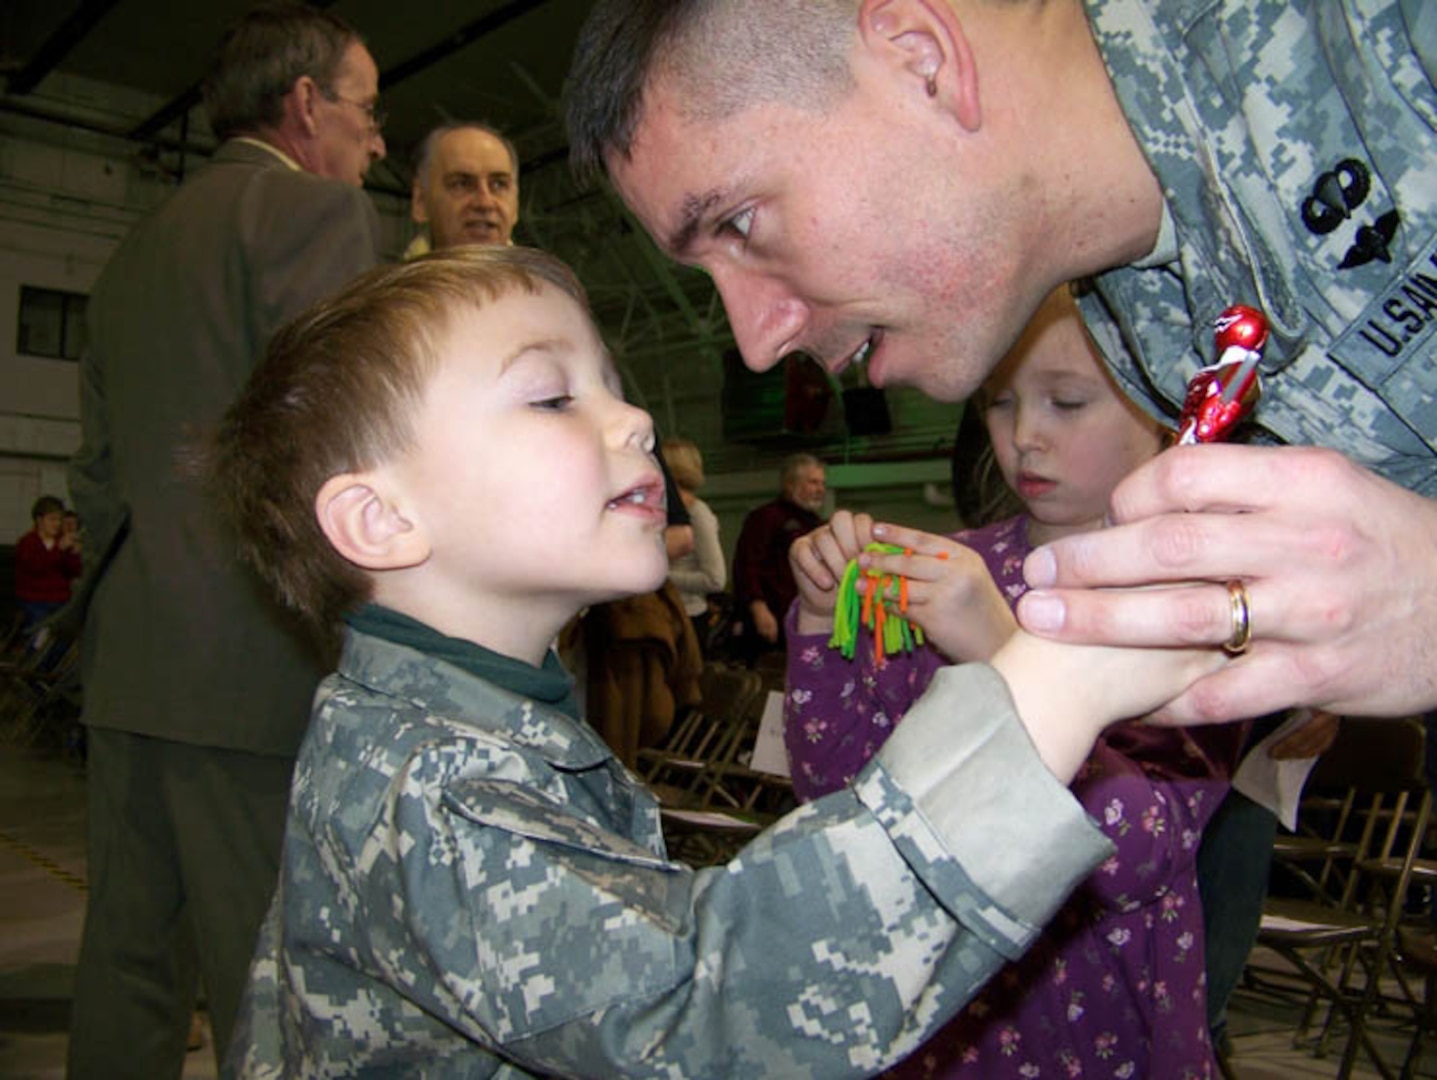 Maj. Scott Jessop of New York Army National Guard's 27th Infantry Brigade Combat Team, shares a moment with his son Ben Jessop and daughter Carrie Jessop during a Send-Off Ceremony before deploying to Afghanistan to train the Afghan National Army and Police Force. When he returns, new programs will screen him for PTSD, TBI and help them re-integrate.